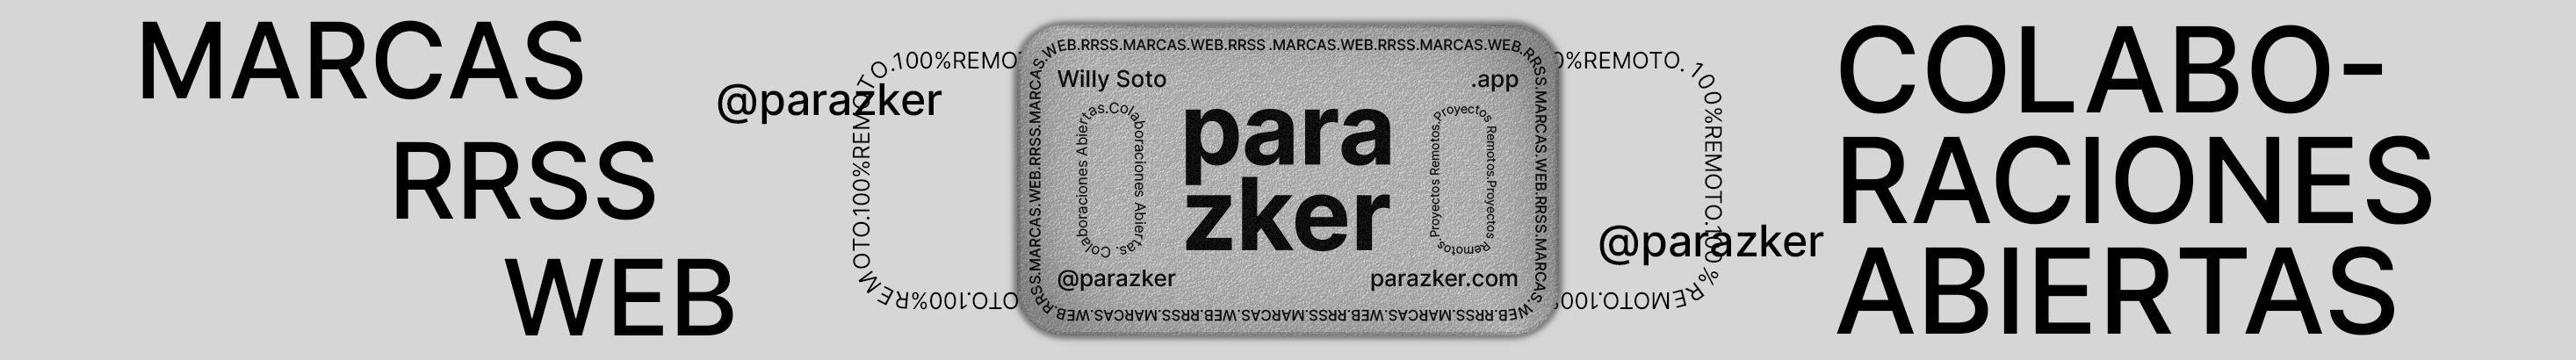 Willy Parazker's profile banner